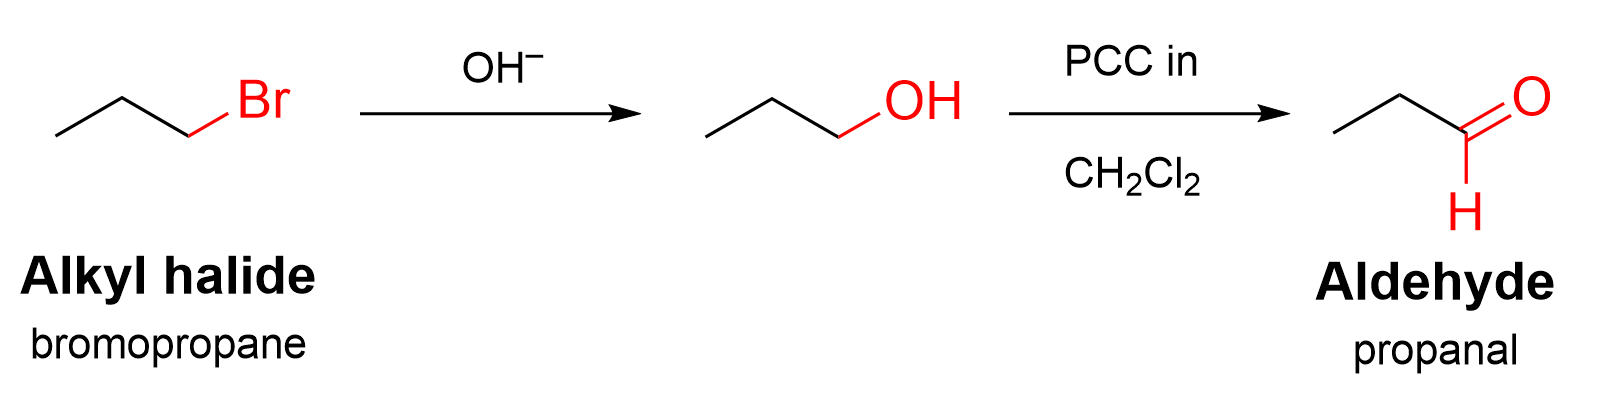 A substitution reaction of bromopropane with OH- makes propanol, which is then oxidized to propanal.